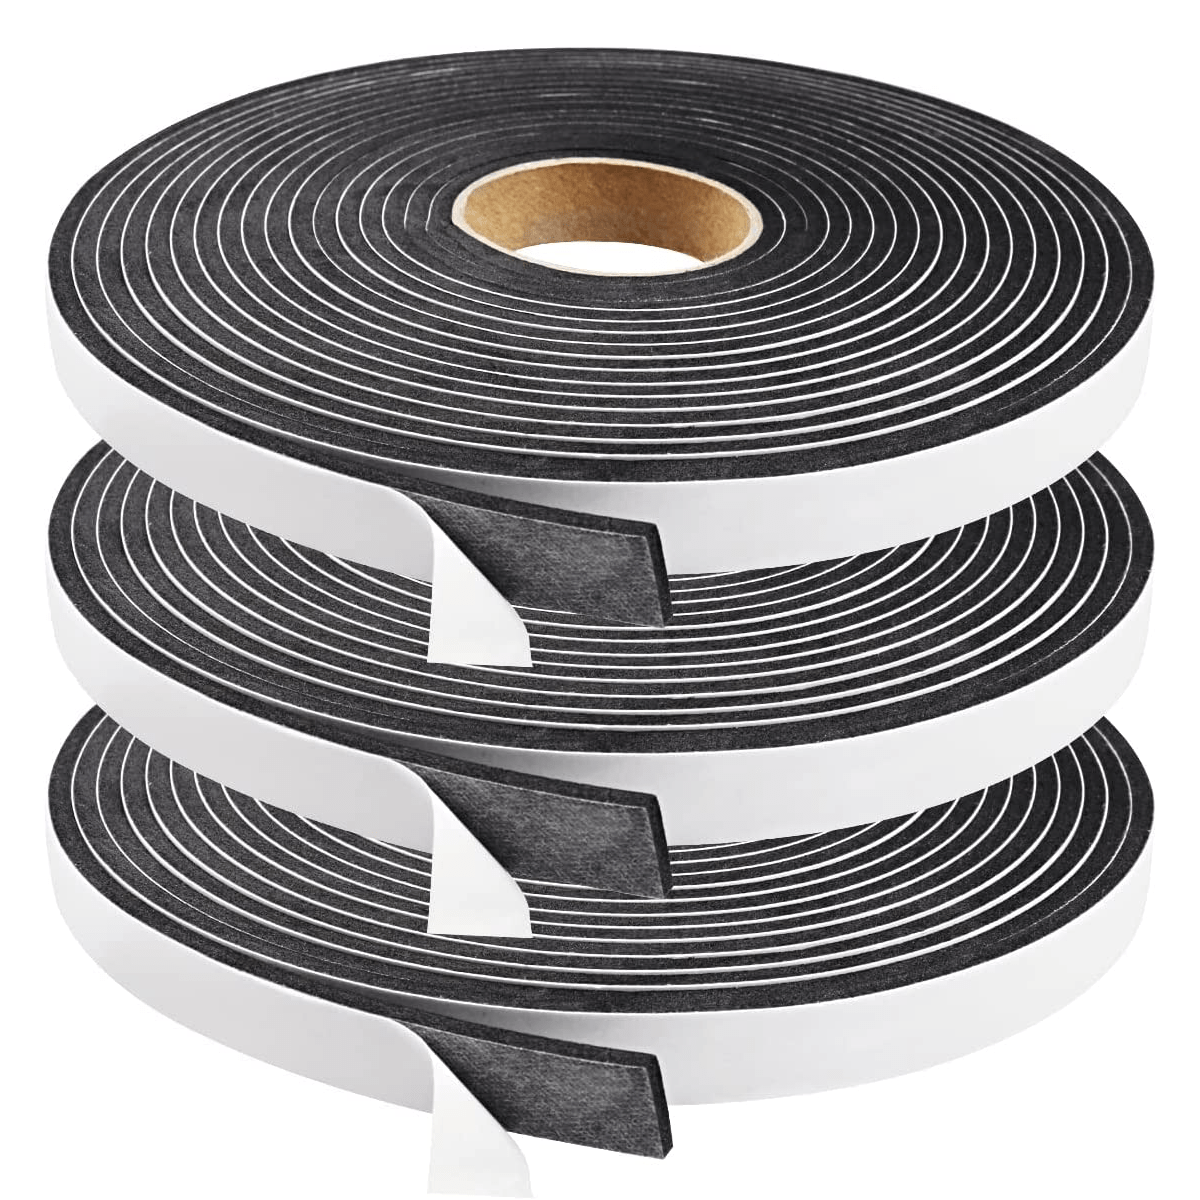 Neoprene Foam Strip Roll by Dualplex, 1 Wide x 10' Long x 1/4 Thick,  Weather Seal High Density Stripping with Adhesive Backing